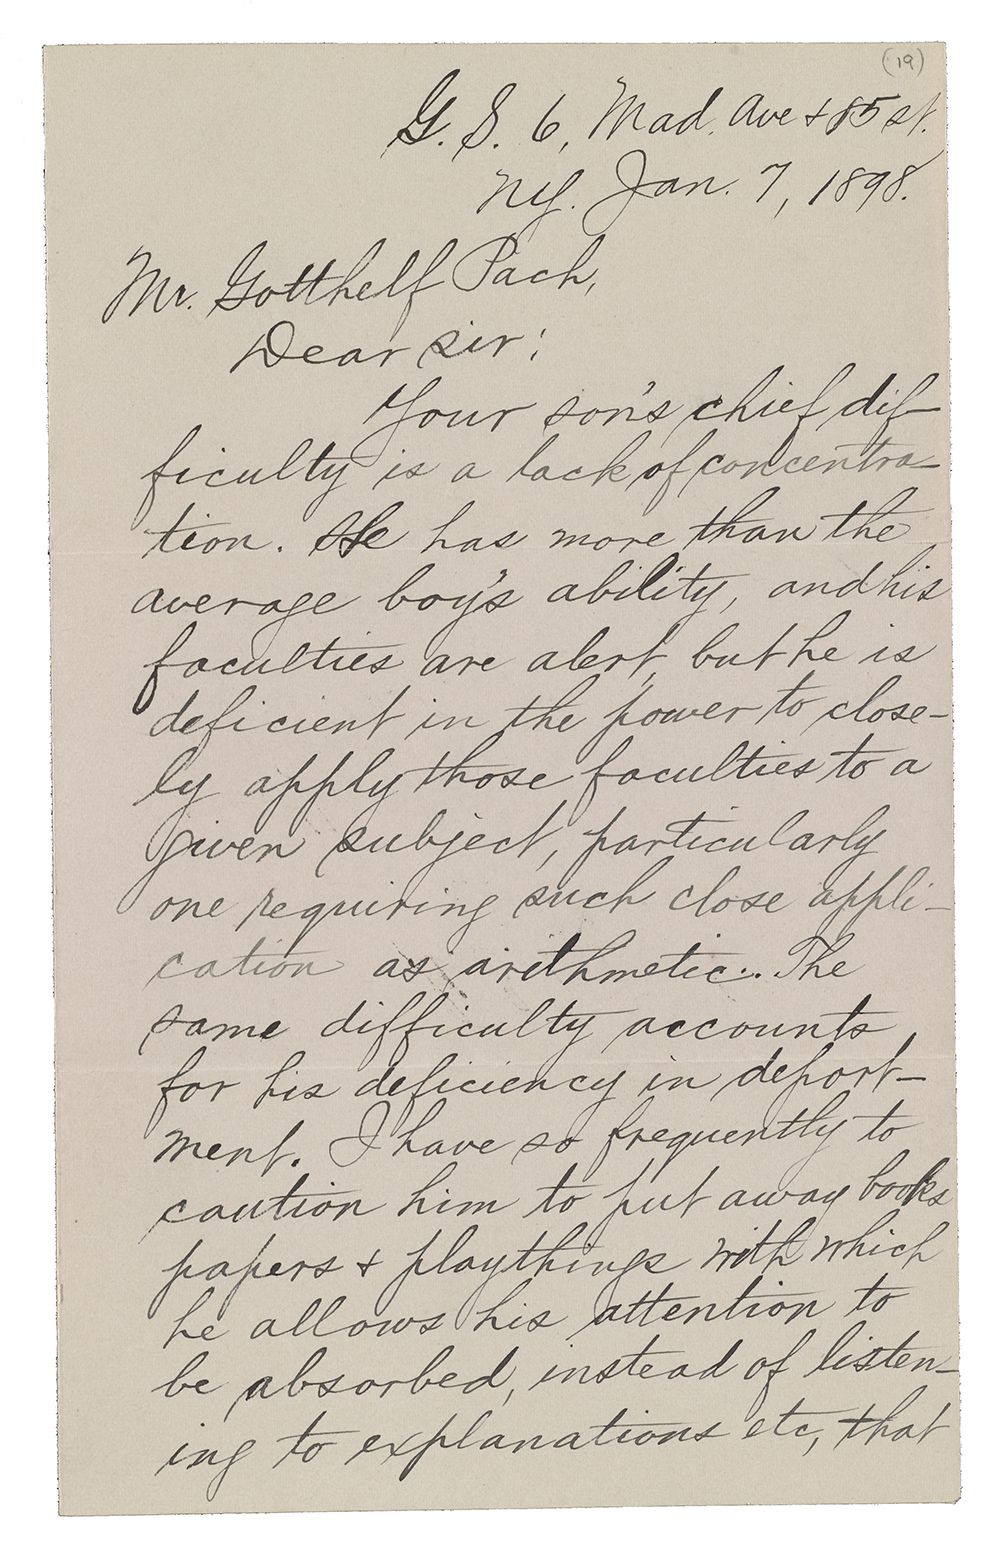 1898 letter to Gotthelf Pach from Magnus Gross regarding the progress of his son, Walter.